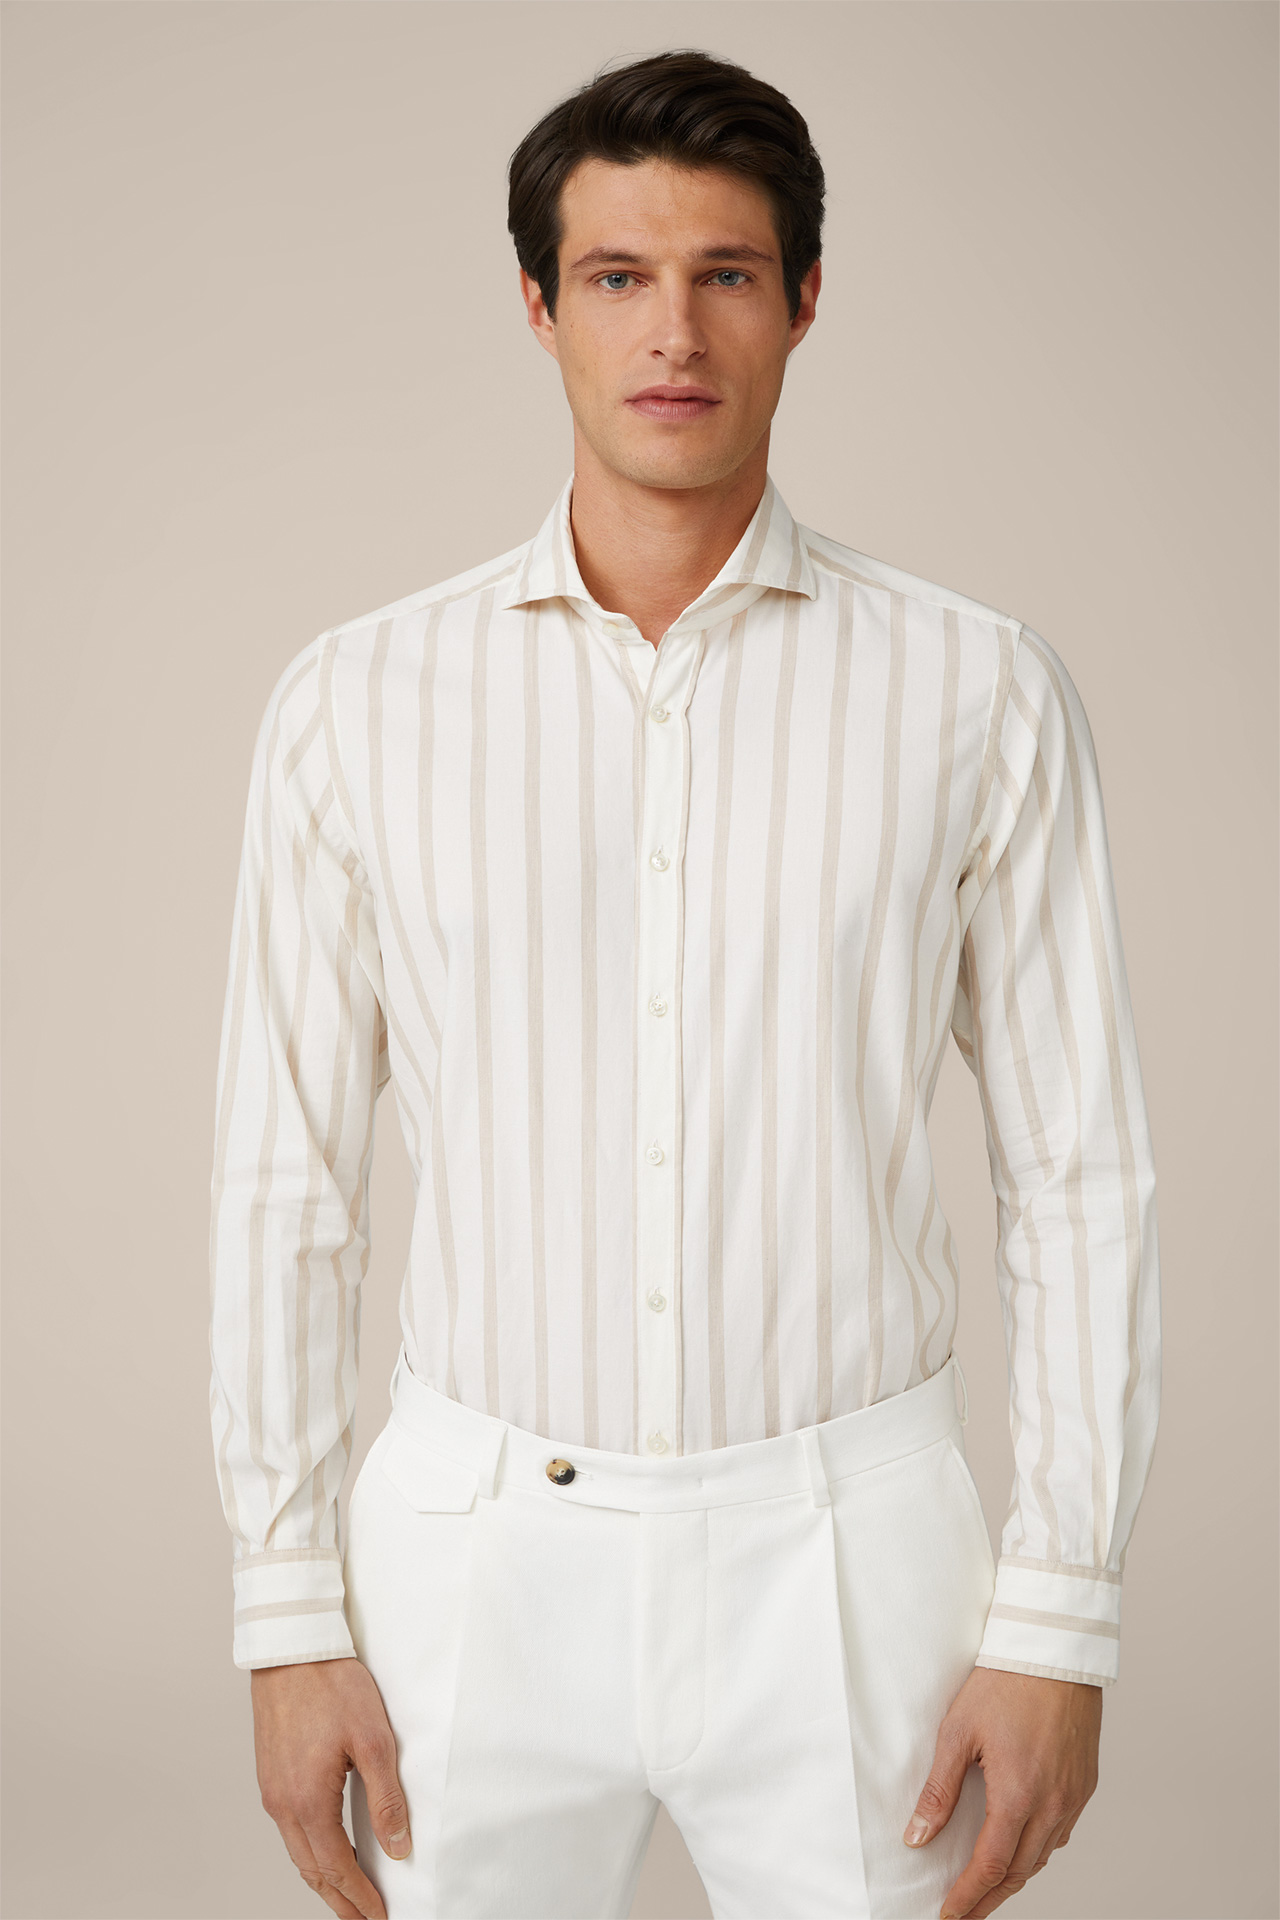 Lano Cotton Shirt in Cream and Brown Stripes